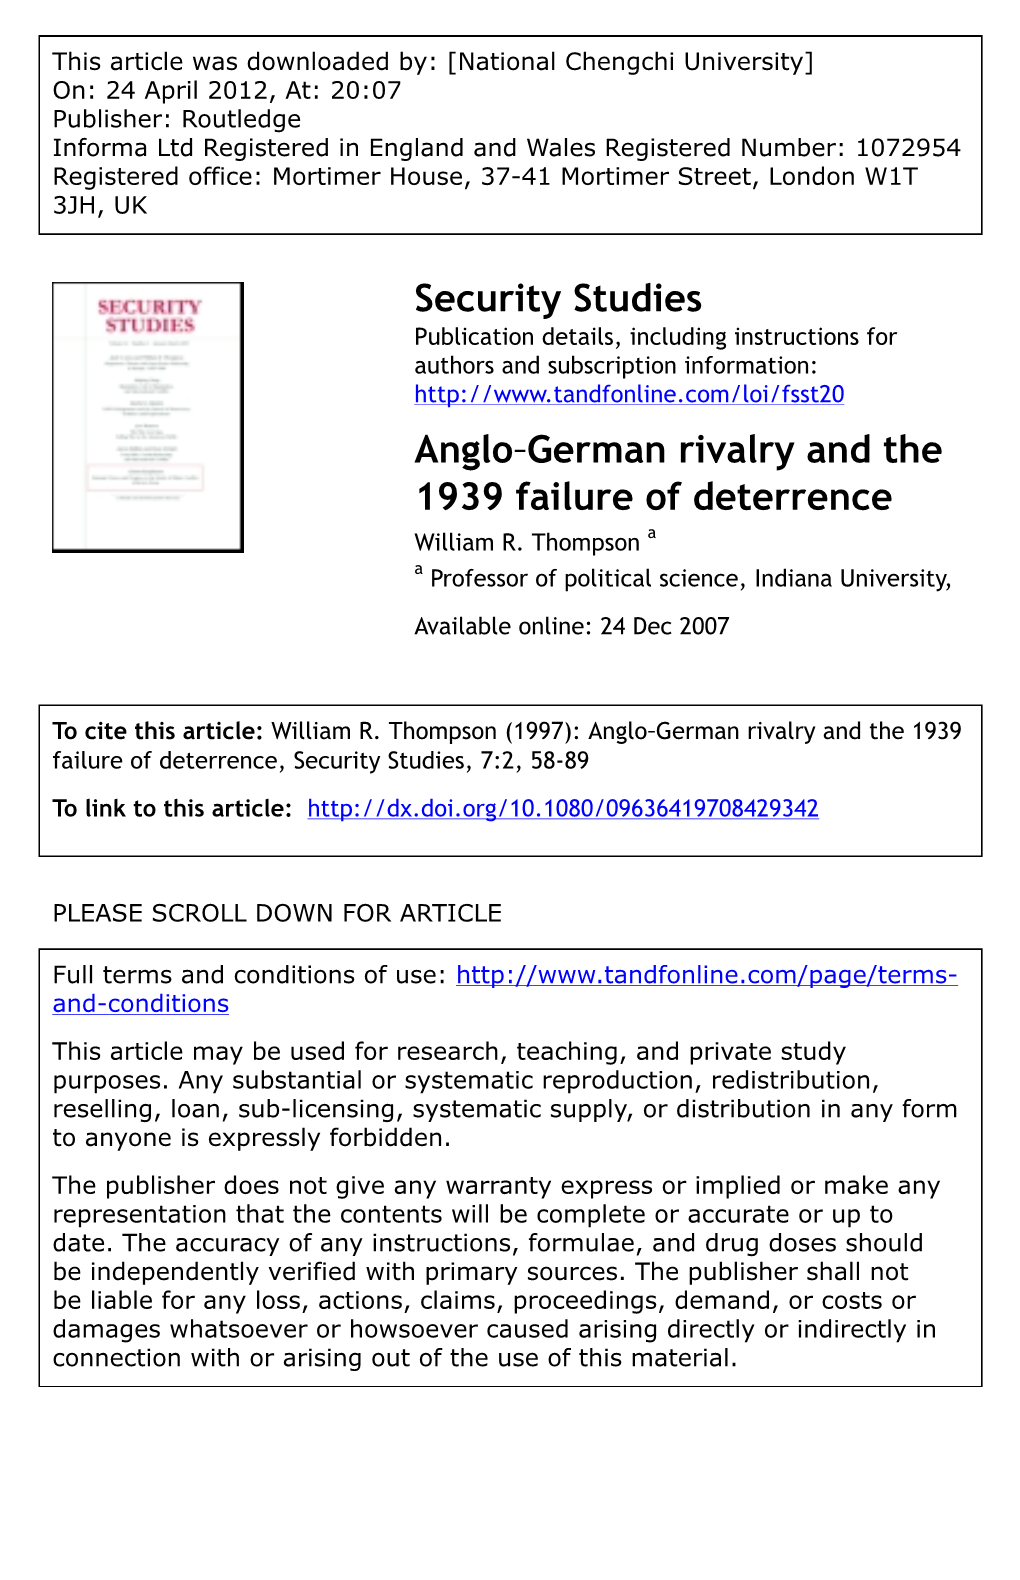 Anglo‐German Rivalry and the 1939 Failure of Deterrence William R